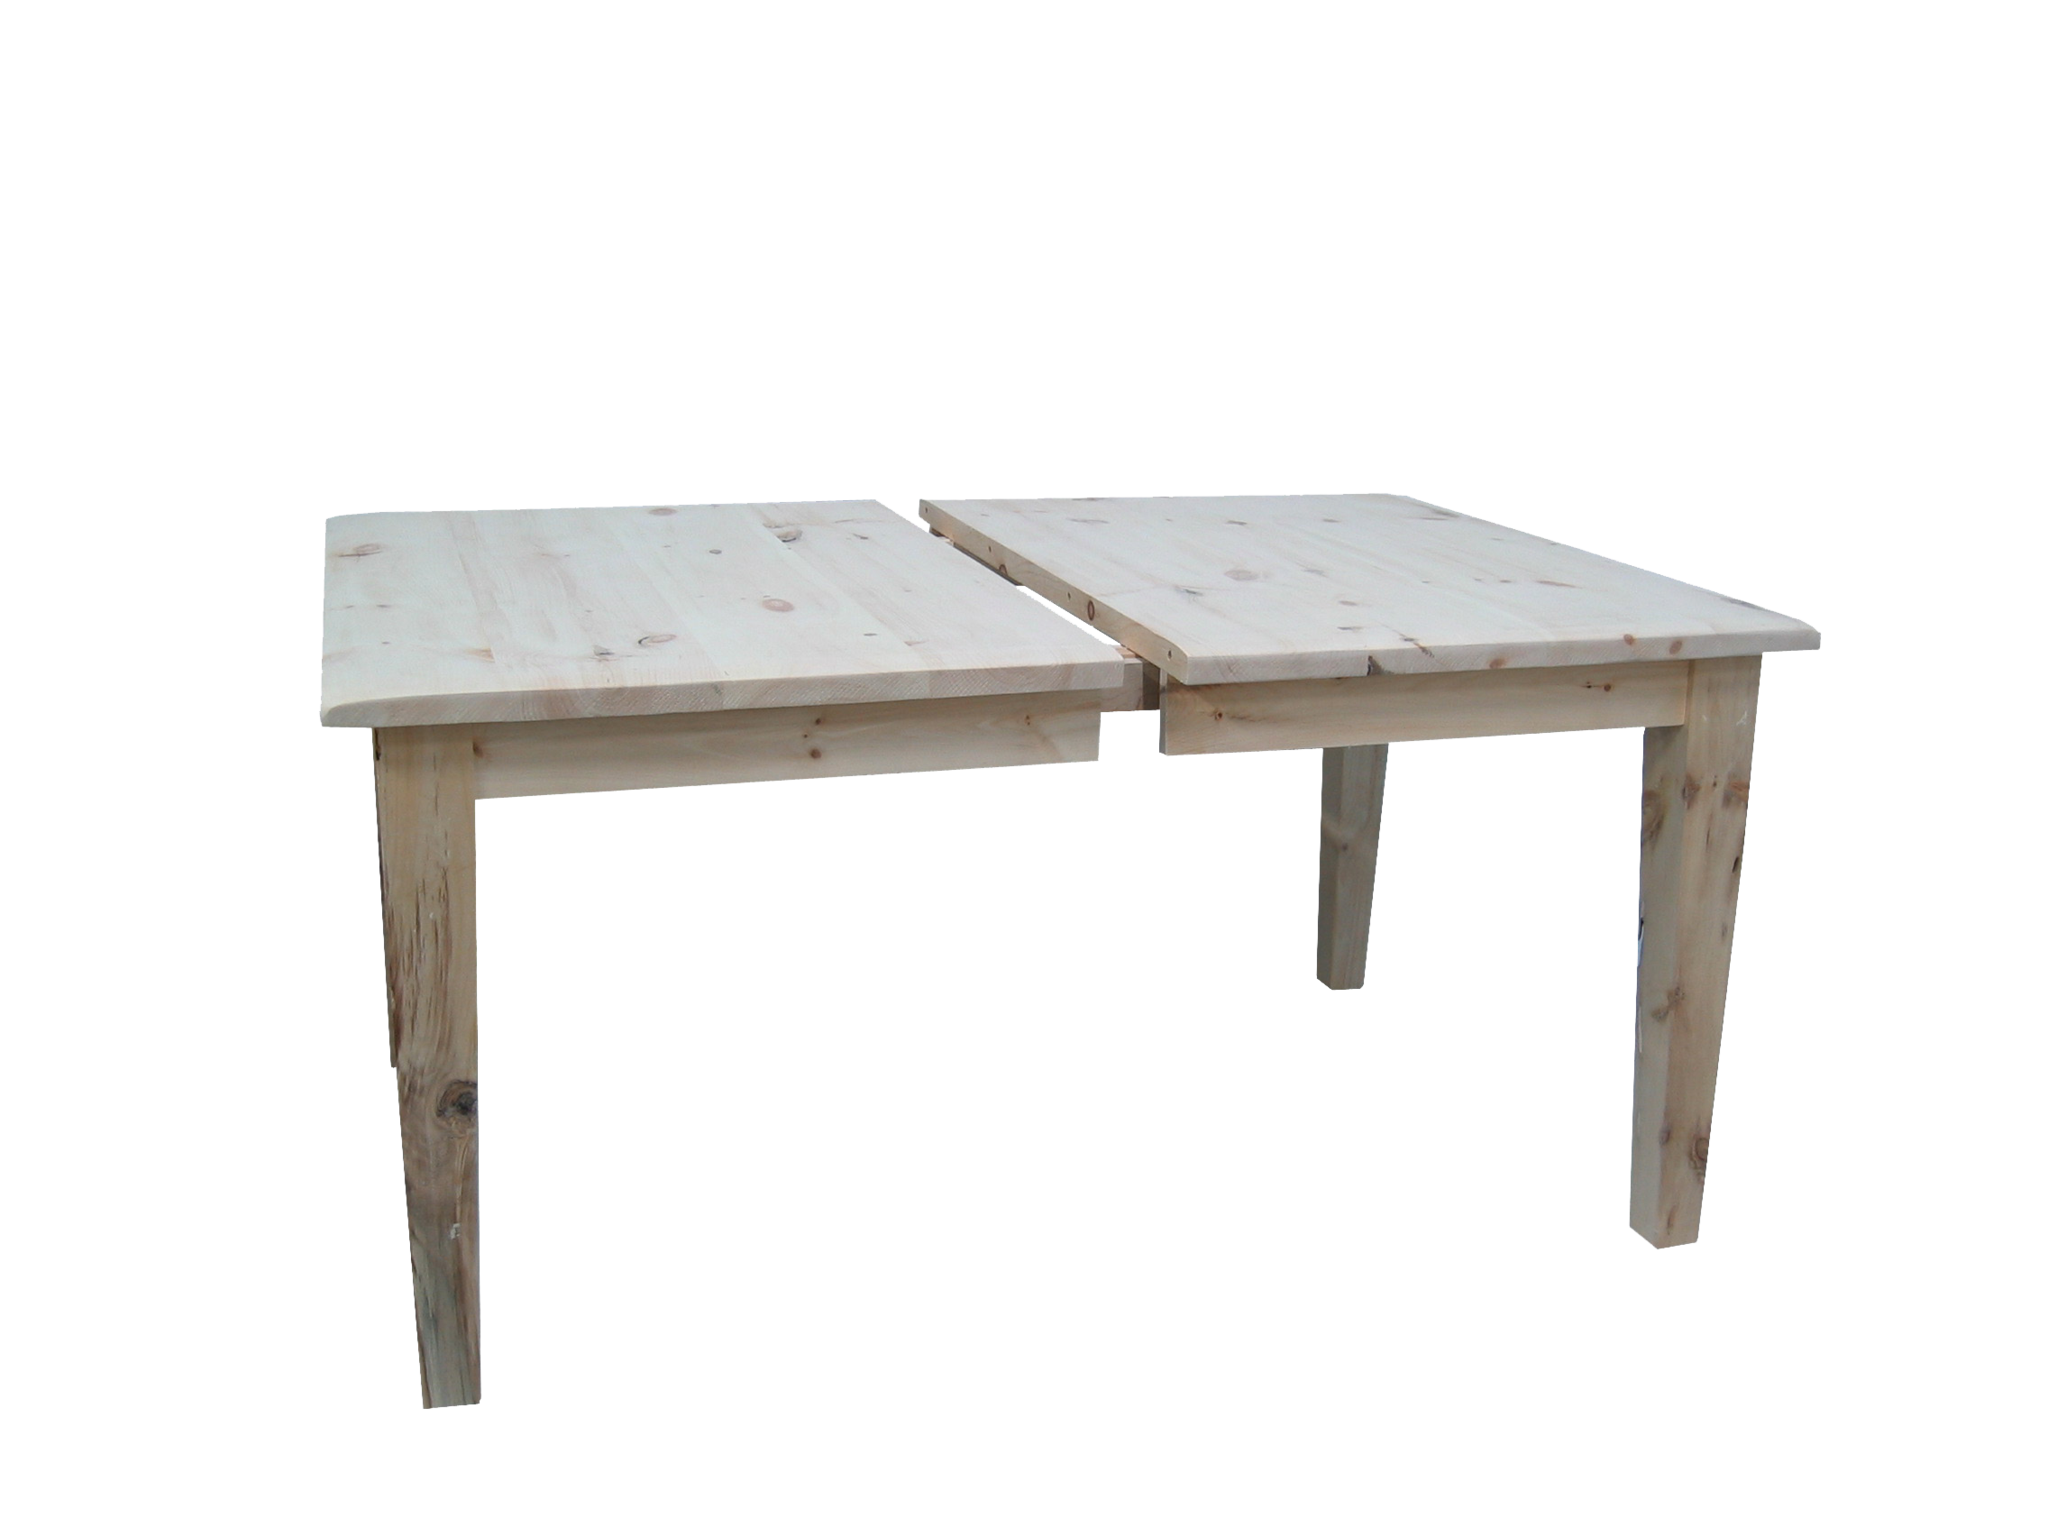 Nith River Rustic Extension Harvest Table